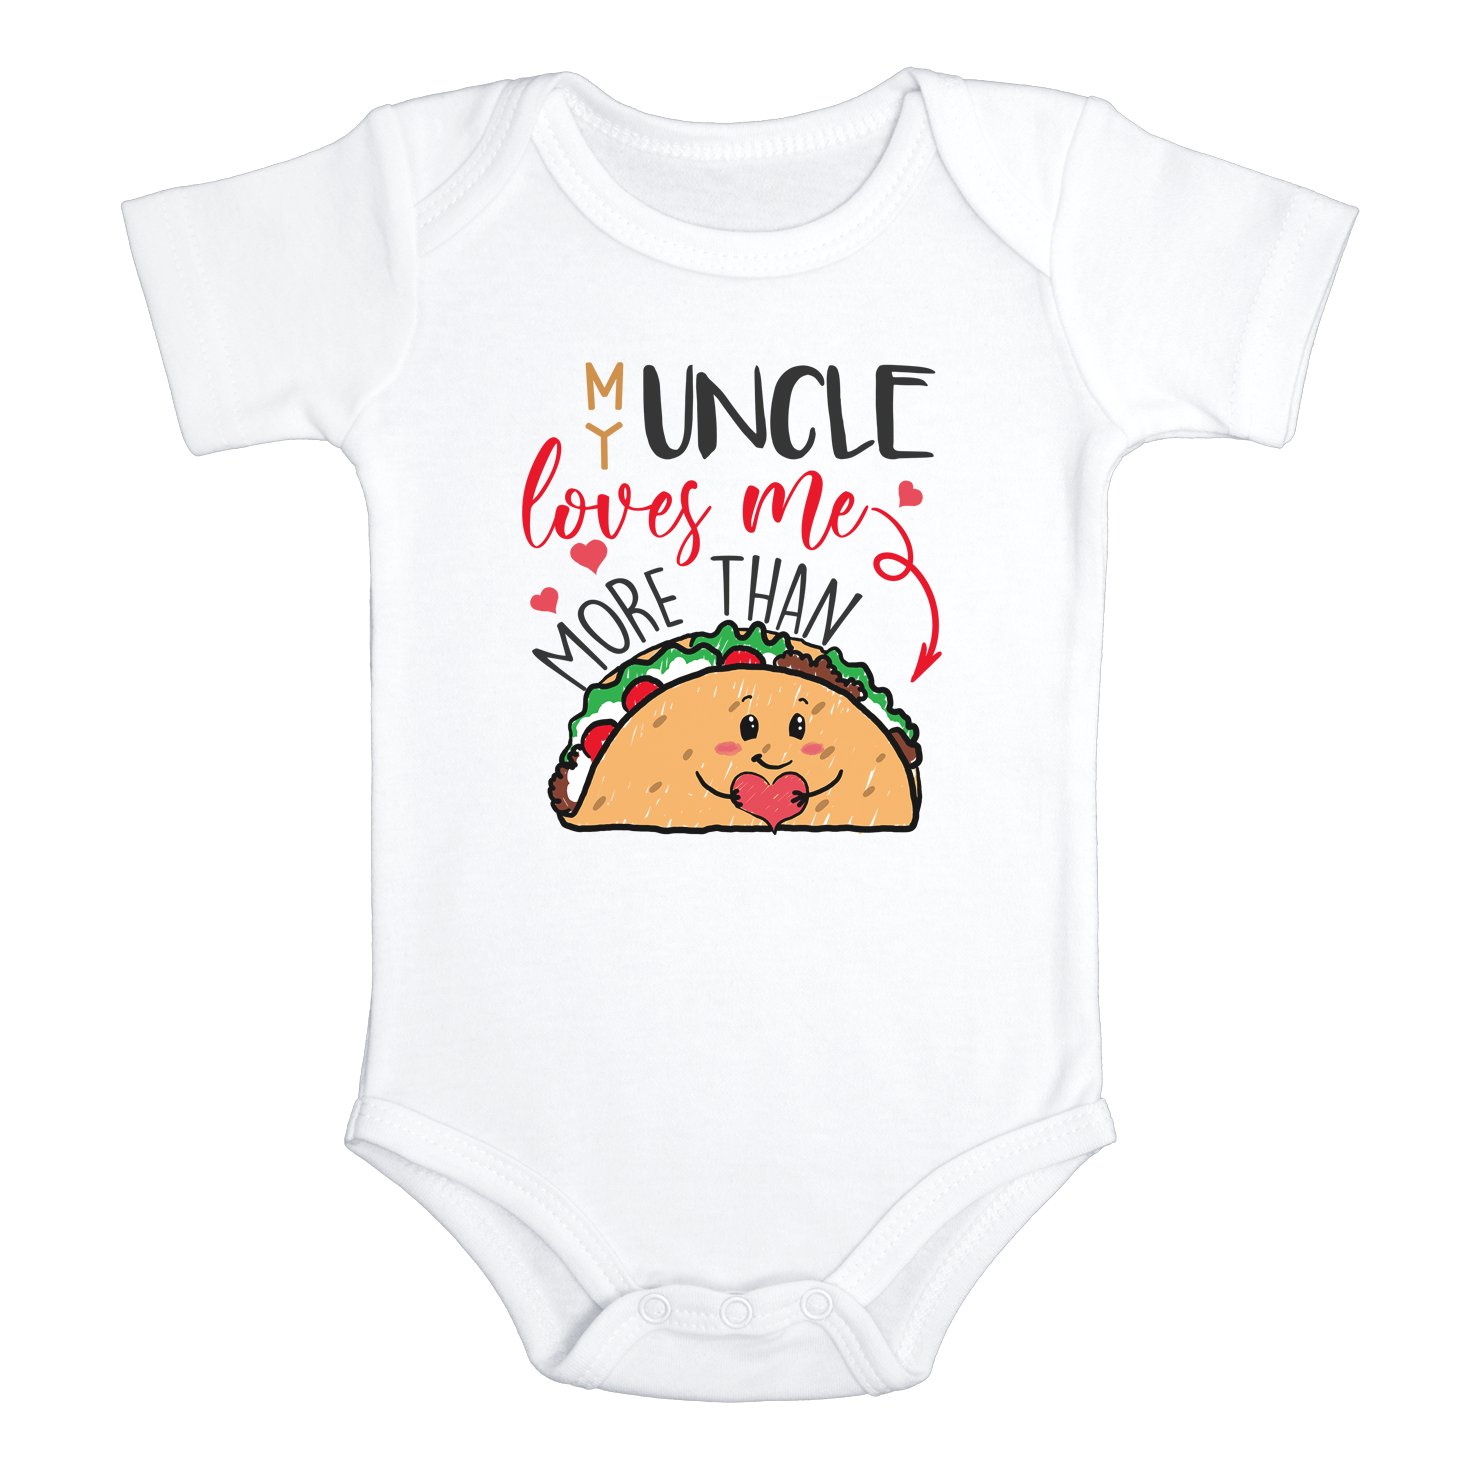 MY UNCLE LOVES ME MORE THAN TACOS Funny baby onesies father's day bodysuit - HappyAddition